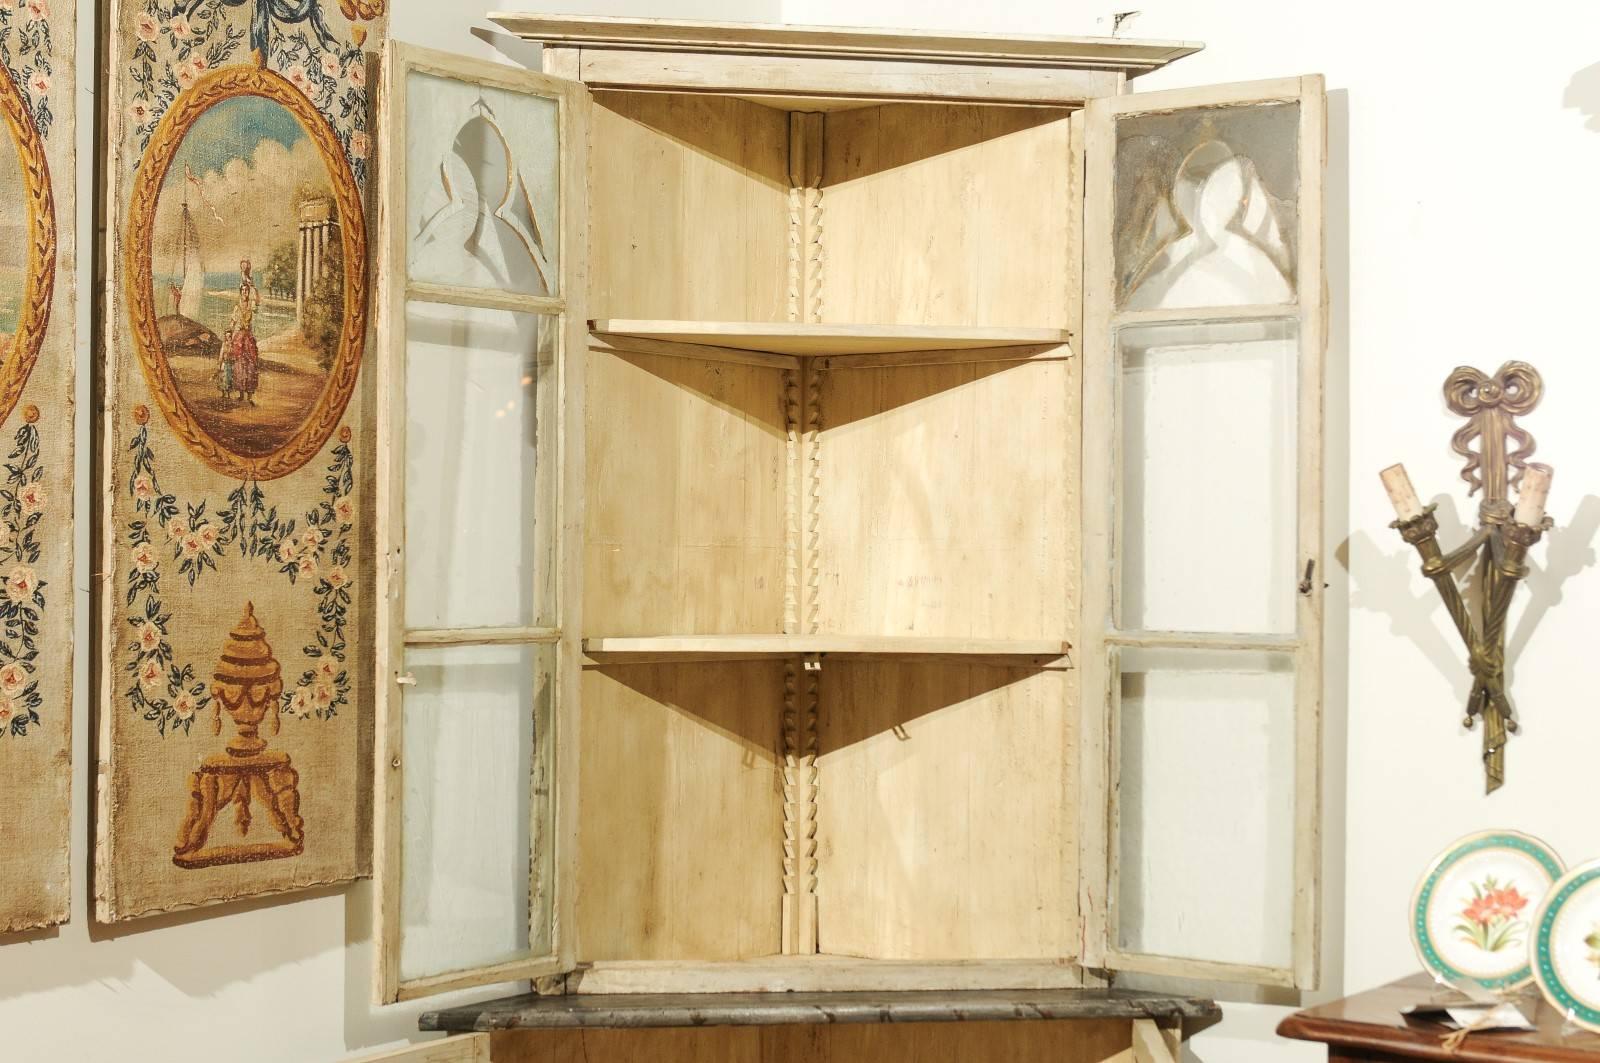 Swedish Gothic Revival Painted Wood Corner Cabinet with Glass Doors, circa 1830 In Good Condition For Sale In Atlanta, GA